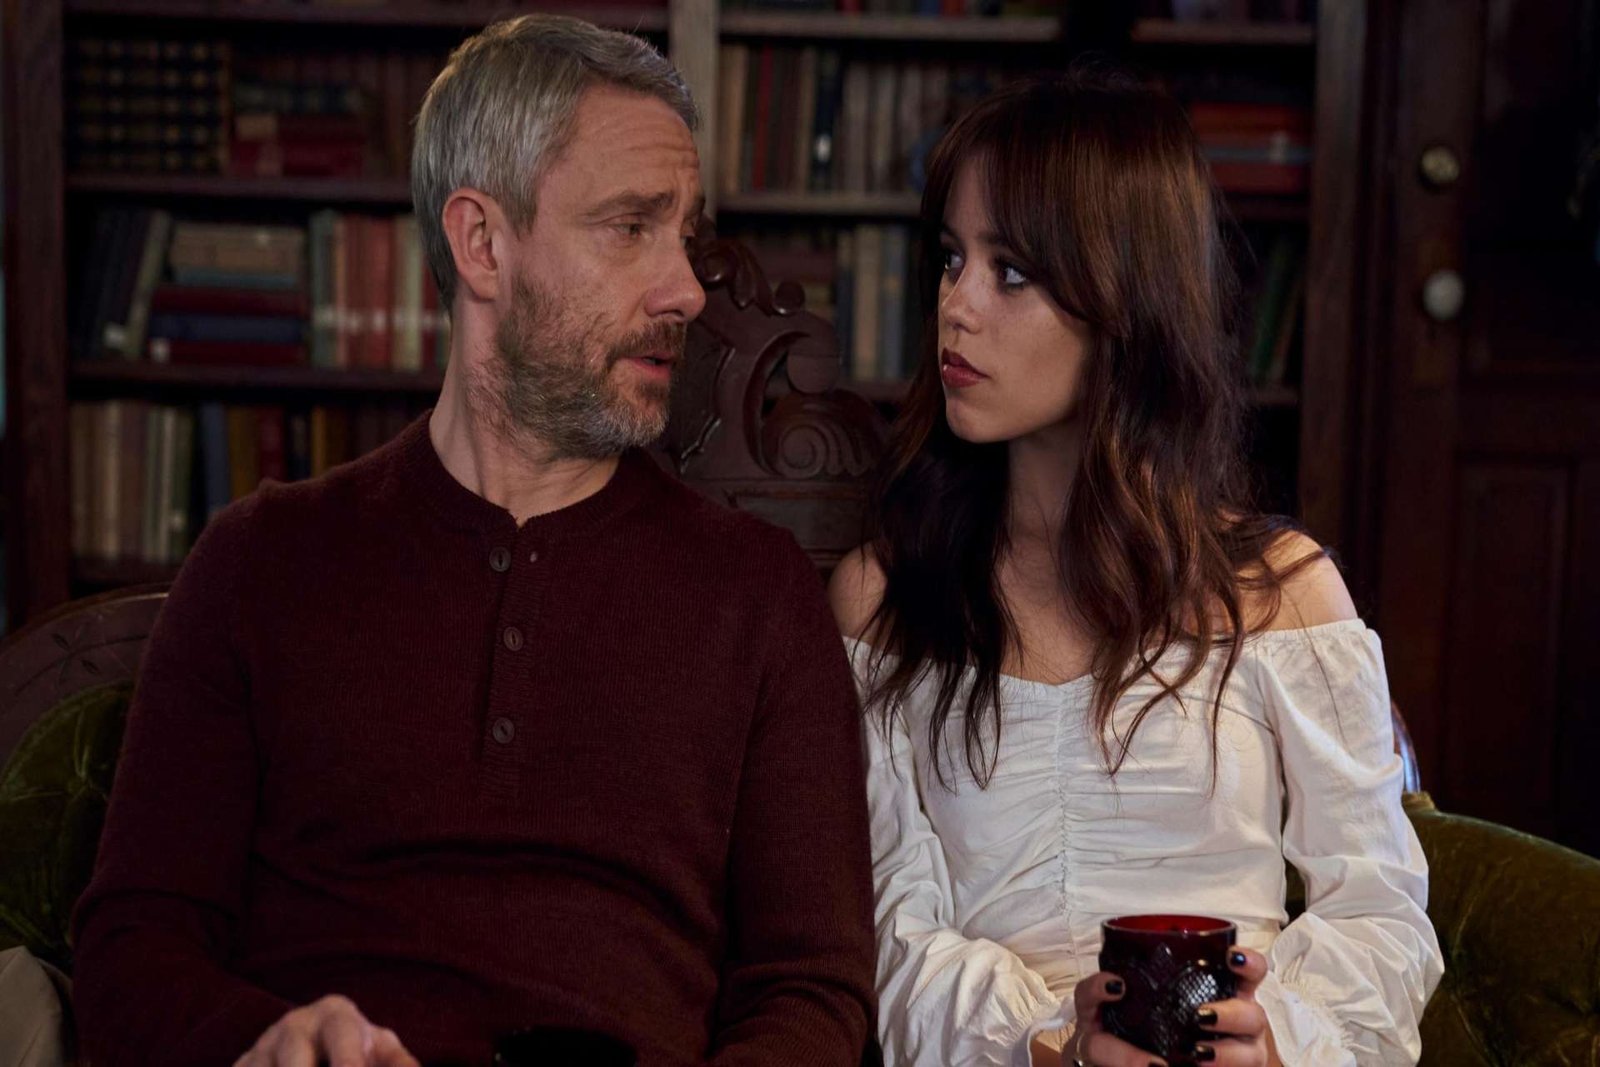 Jenna Ortega’s Intimate Scenes with Martin Freeman in ‘Miller’s Girl’ Spark Outrage and Controversy